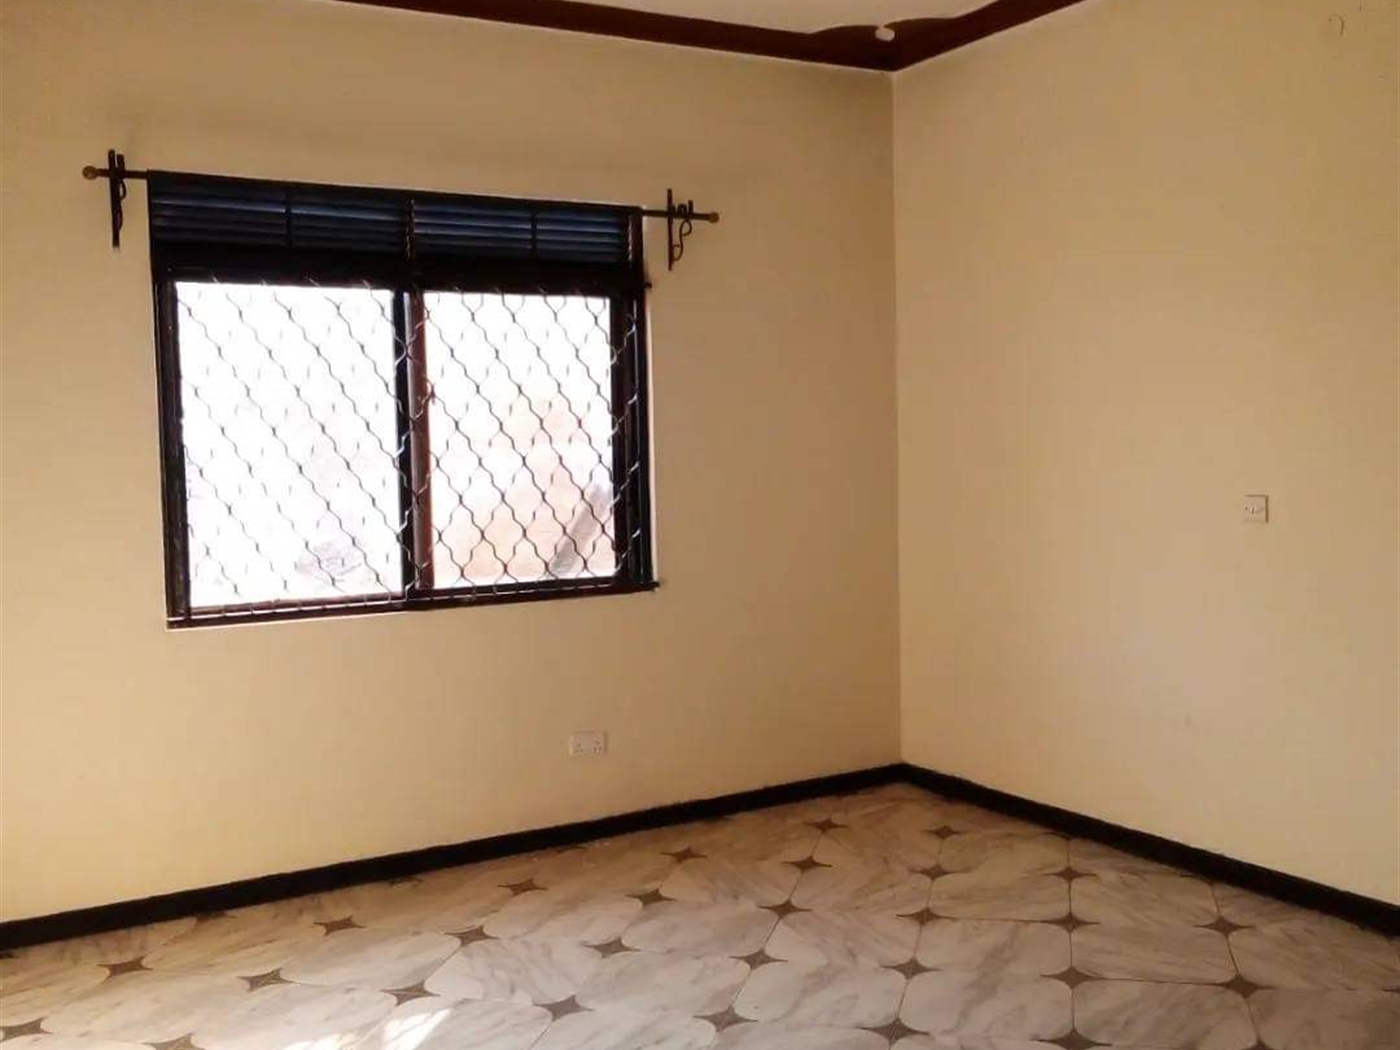 Bungalow for rent in Bulindo Wakiso